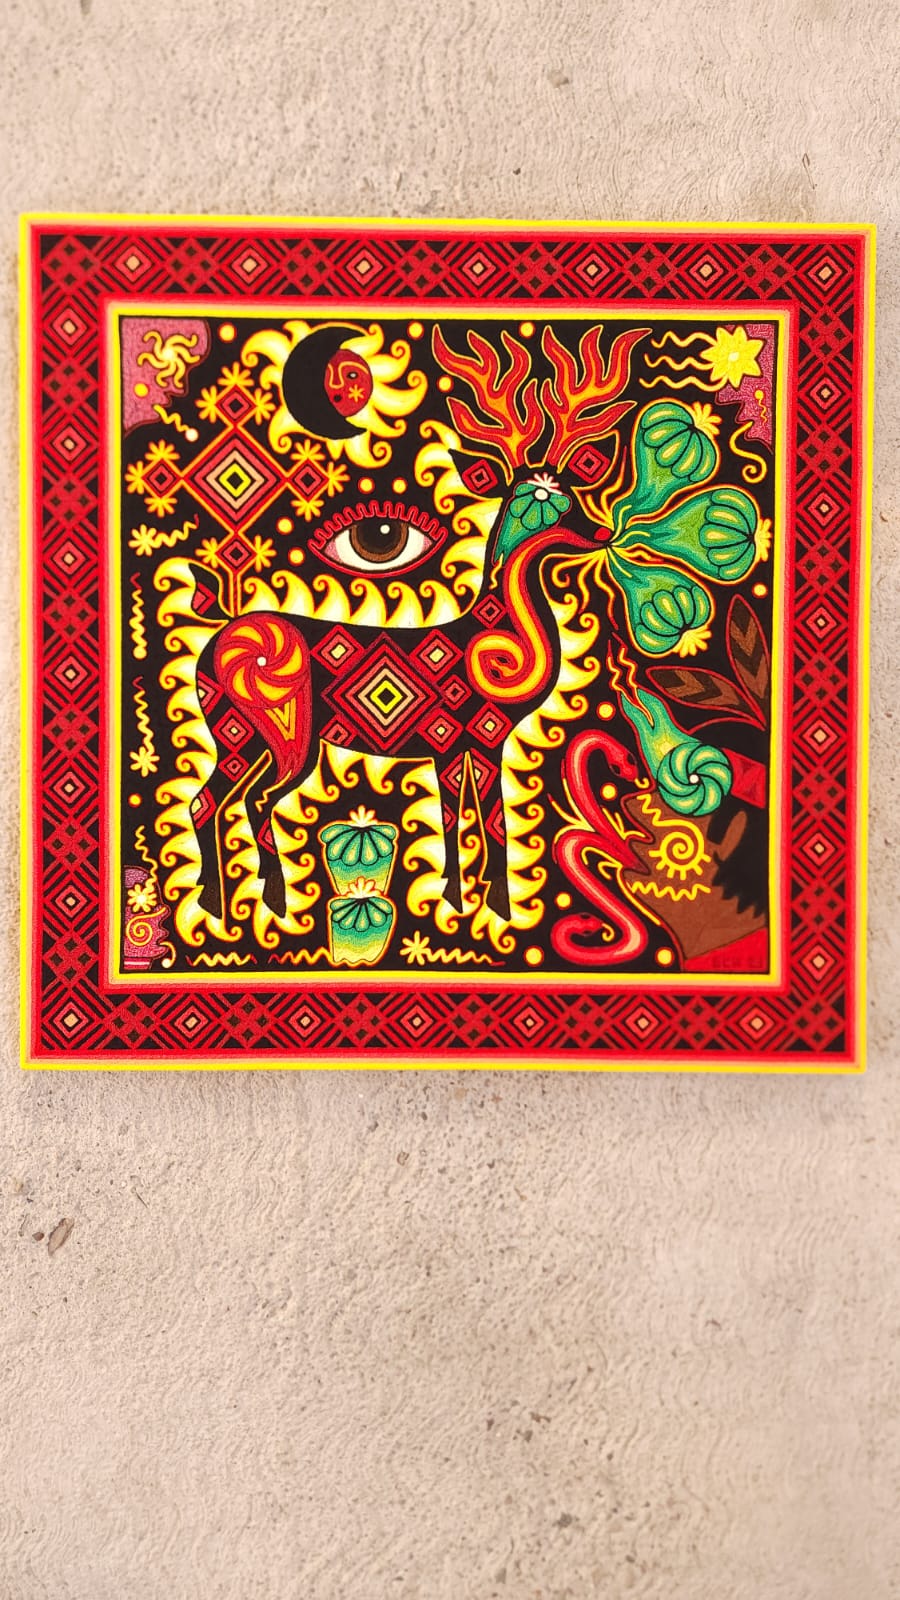 Huichol Indian Mexican Folk Art Yarn Painting Excelente Castro PP6264